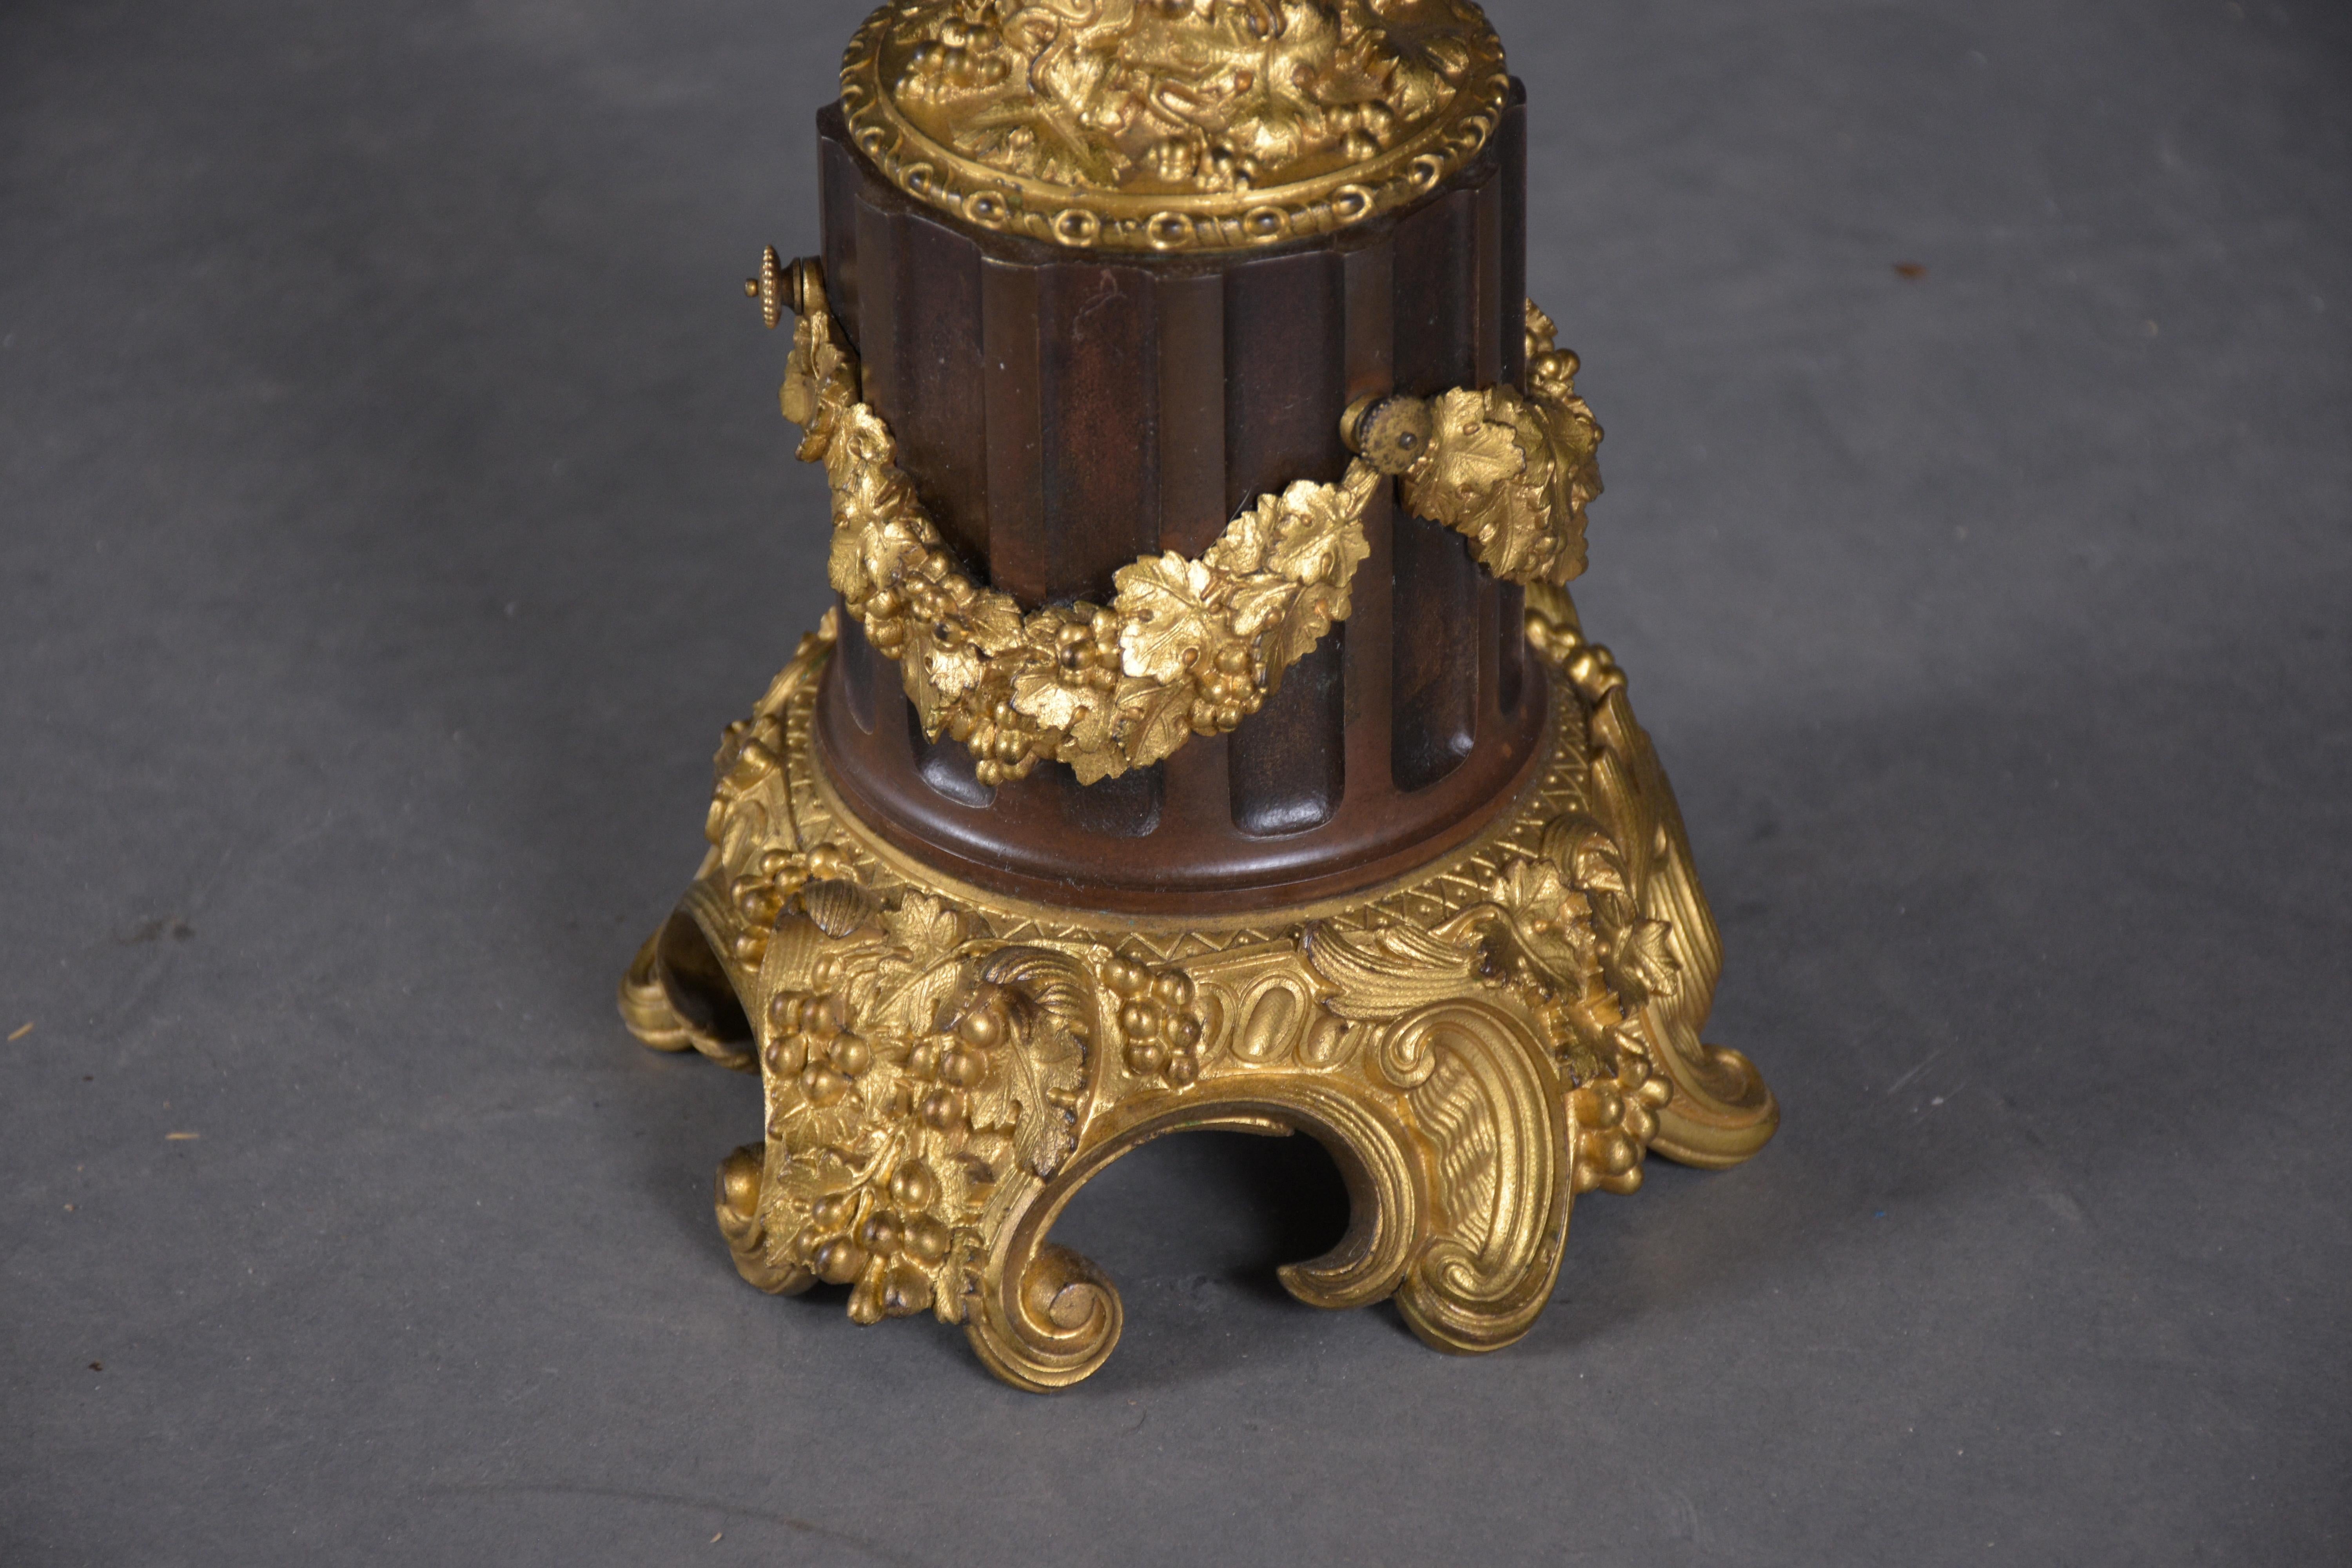 Elegant 19th-Century French Bronzed Urns with Gold Ormolu Details 3